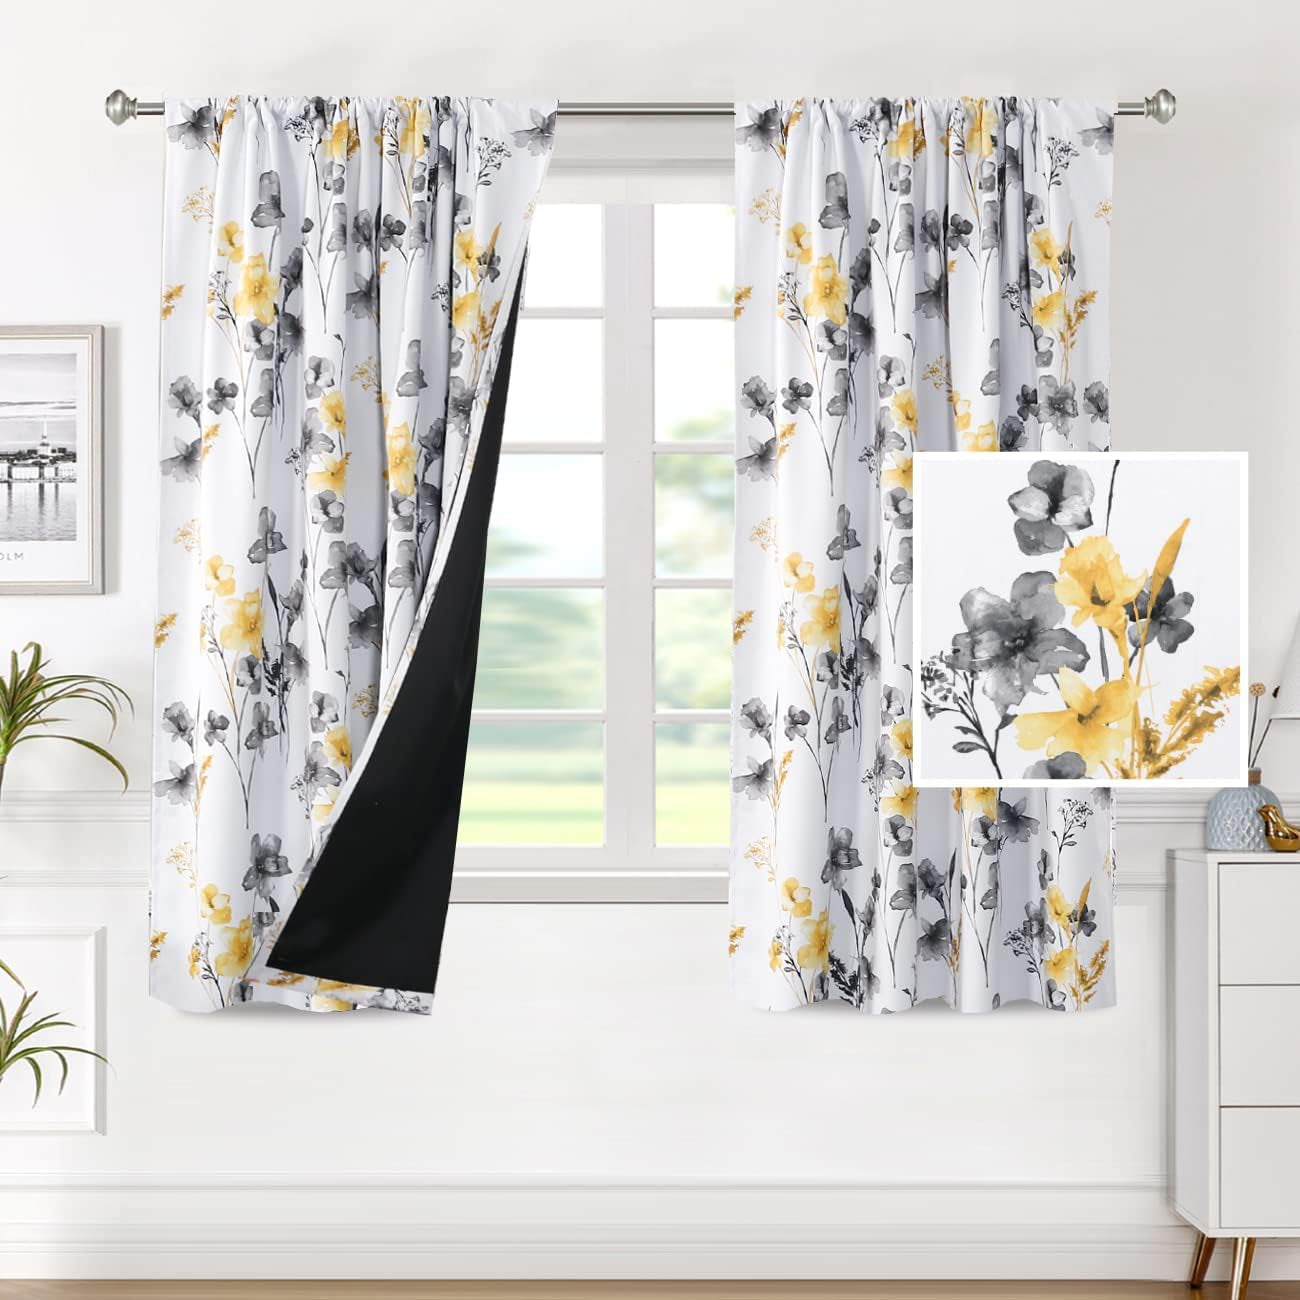 H.VERSAILTEX 100% Blackout Curtains for Bedroom Cattleya Floral Printed Drapes 84 Inches Long Leah Floral Pattern Full Light Blocking Drapes with Black Liner Rod Pocket 2 Panels, Navy/Taupe  H.VERSAILTEX Grey/Yellow 52"W X 63"L 